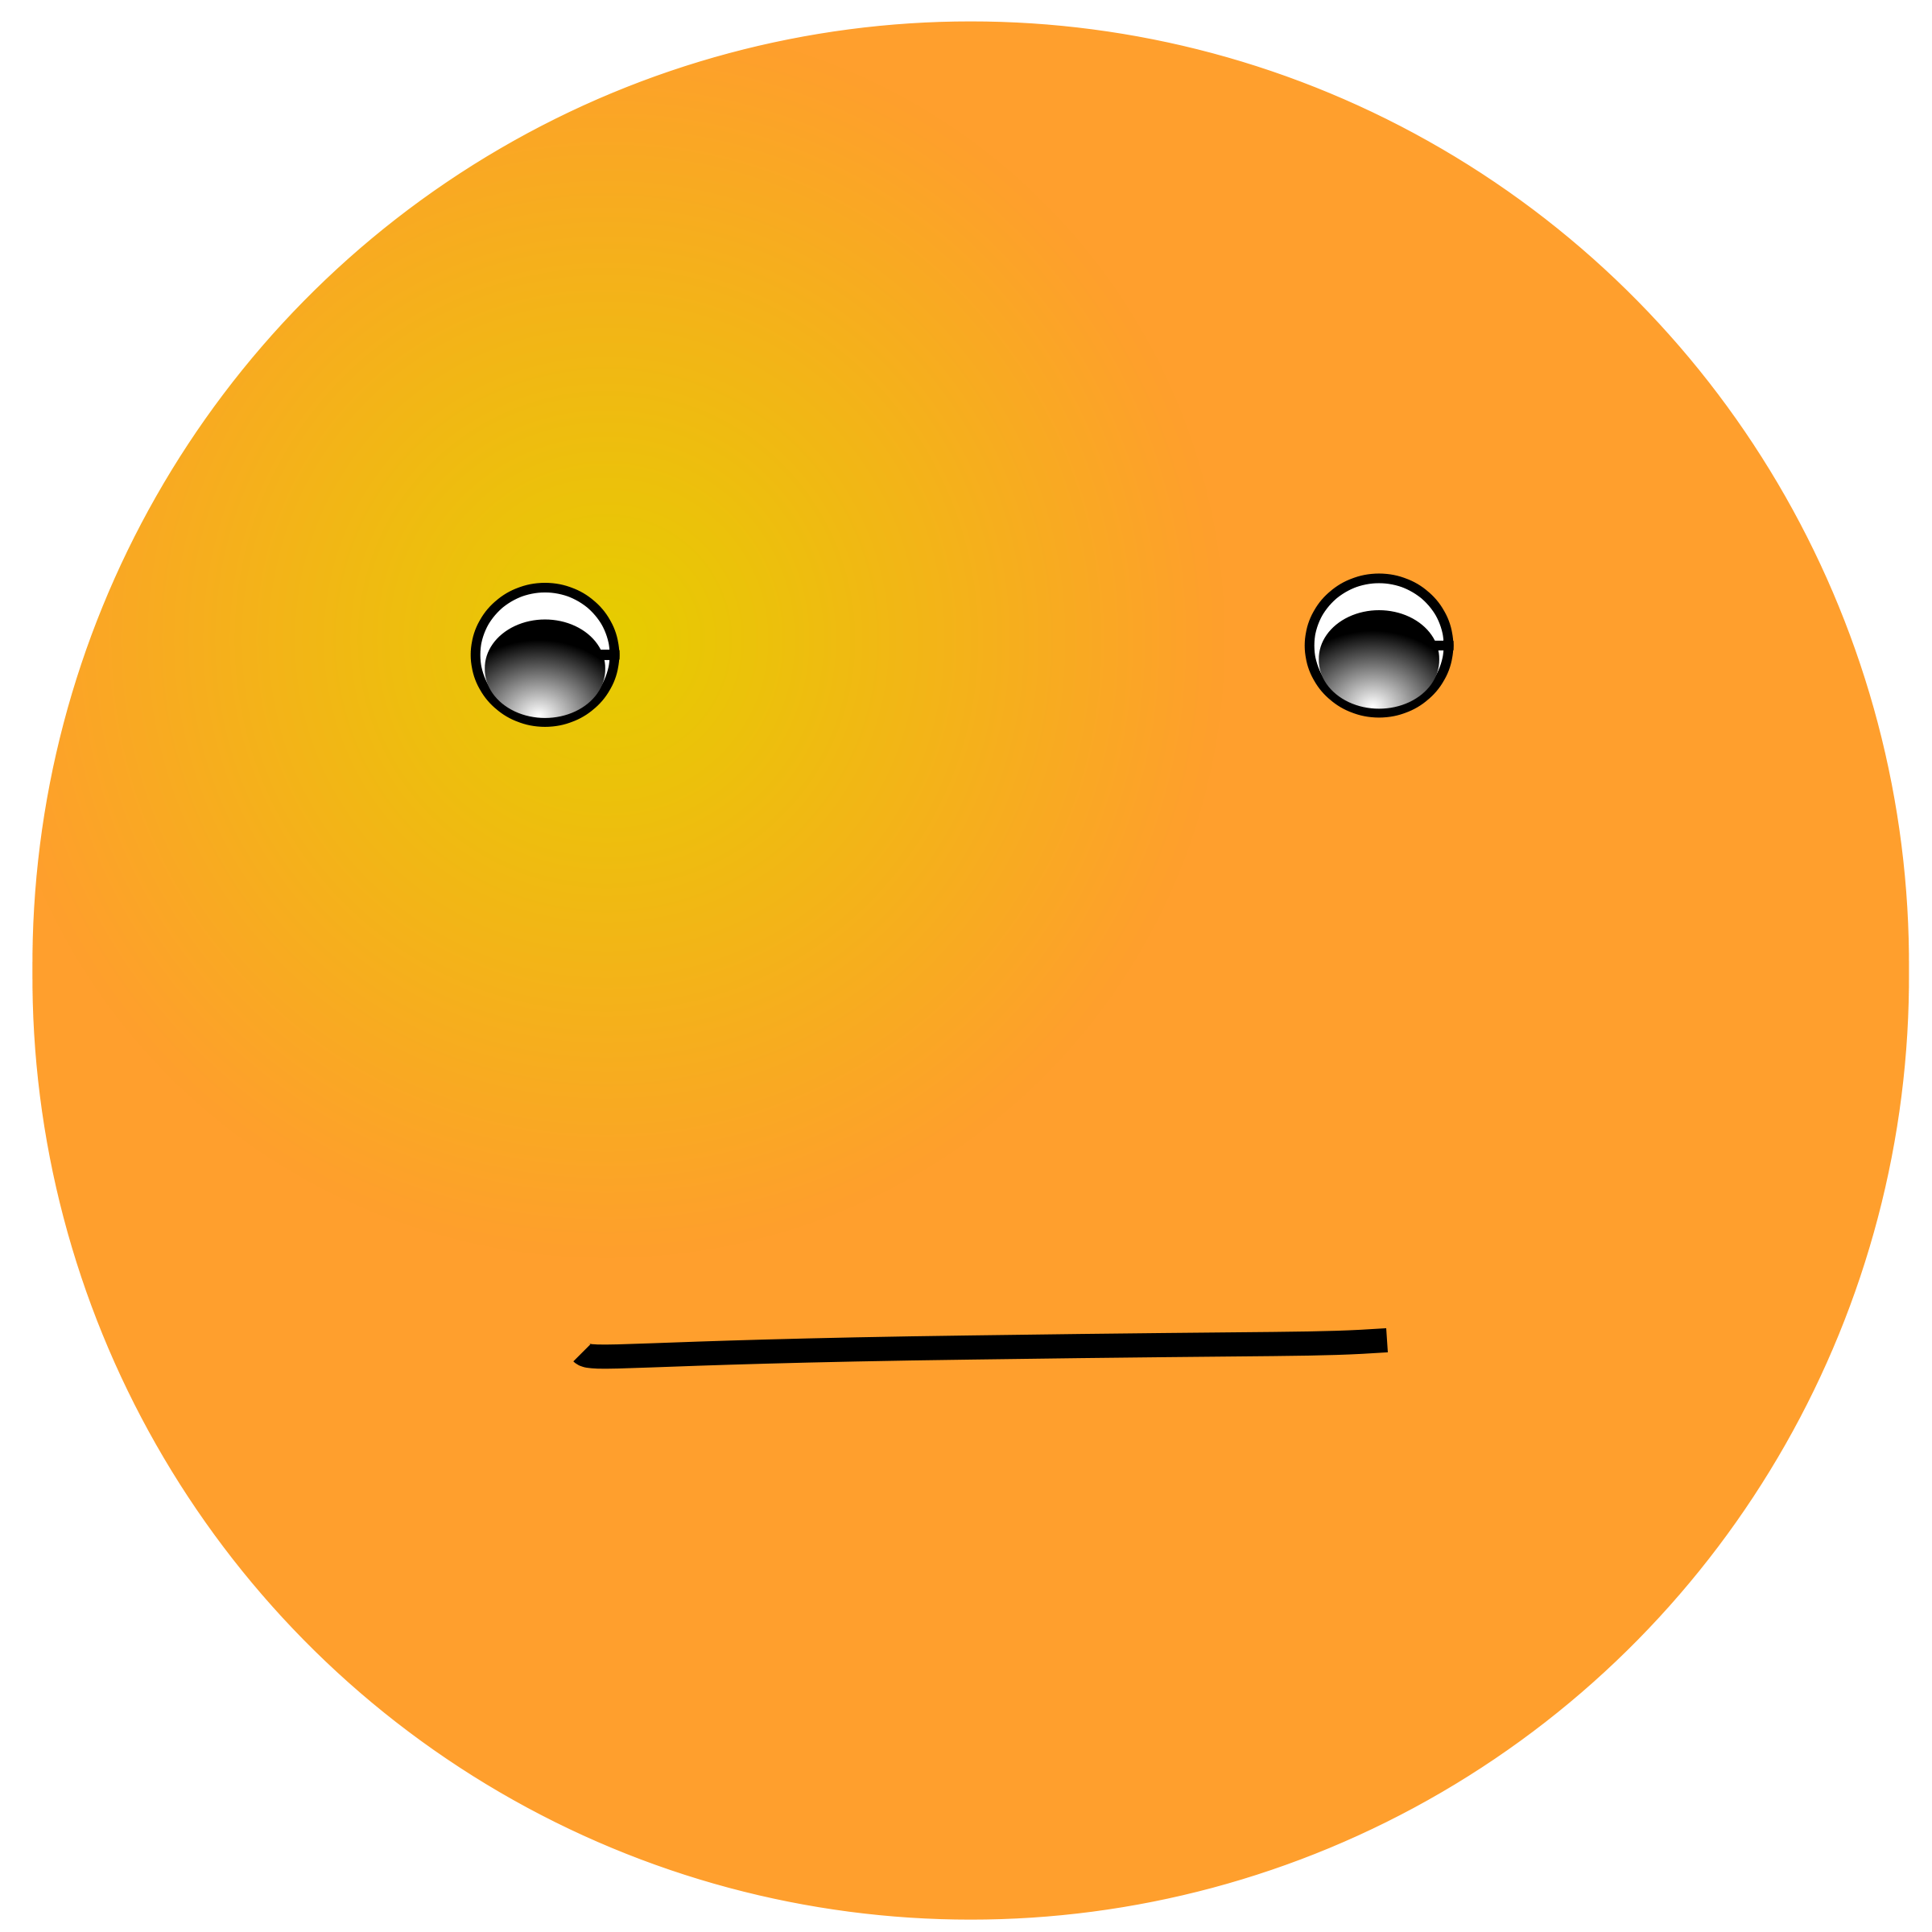 Happy face smiley face happy and sad face clip art free clipart images 2 2